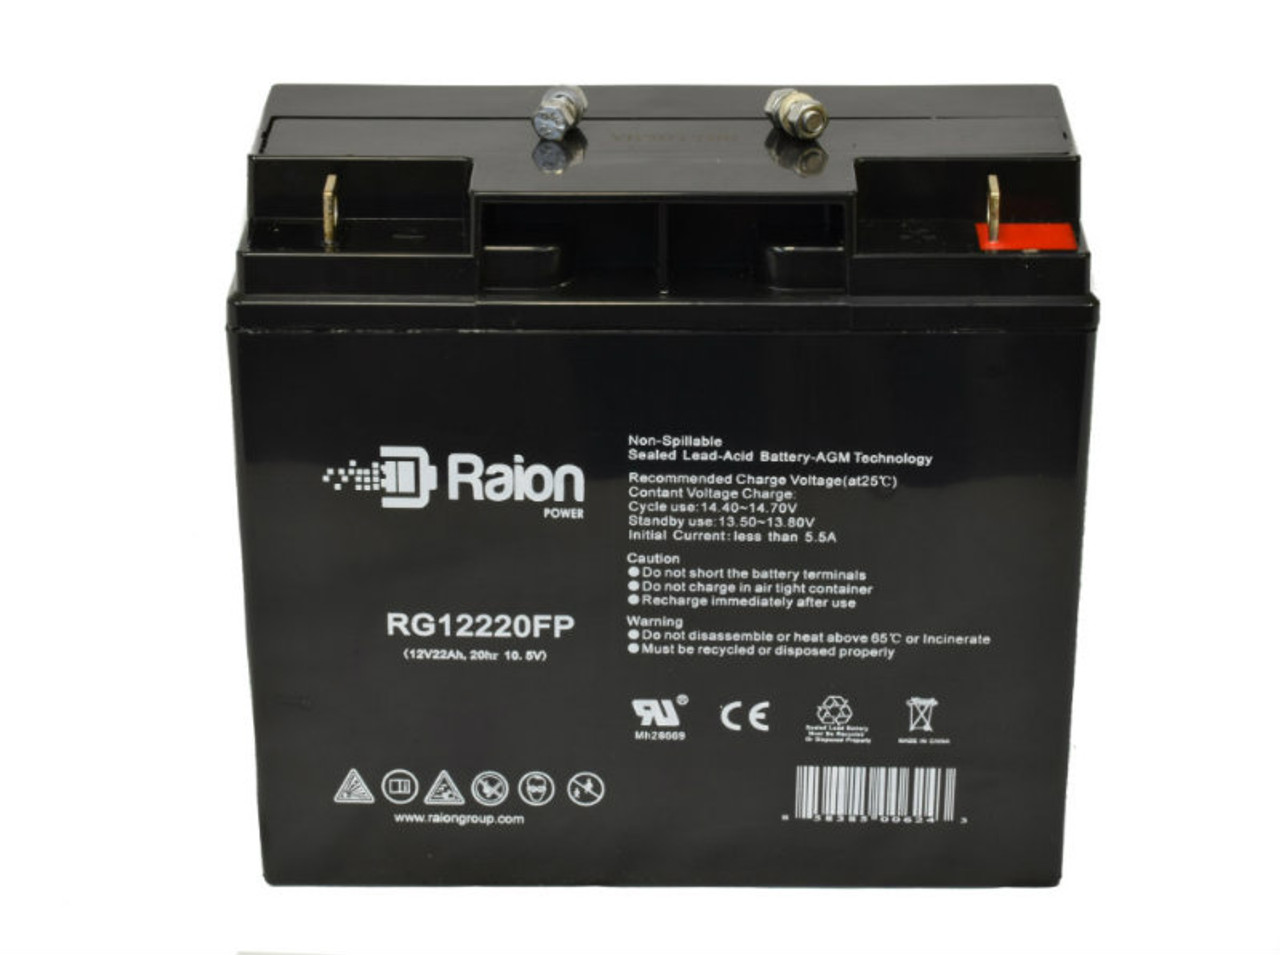 Raion Power RG12220FP 12V 22Ah AGM Battery for Quick Cable 604012-001 Booster Pack Jump Starter